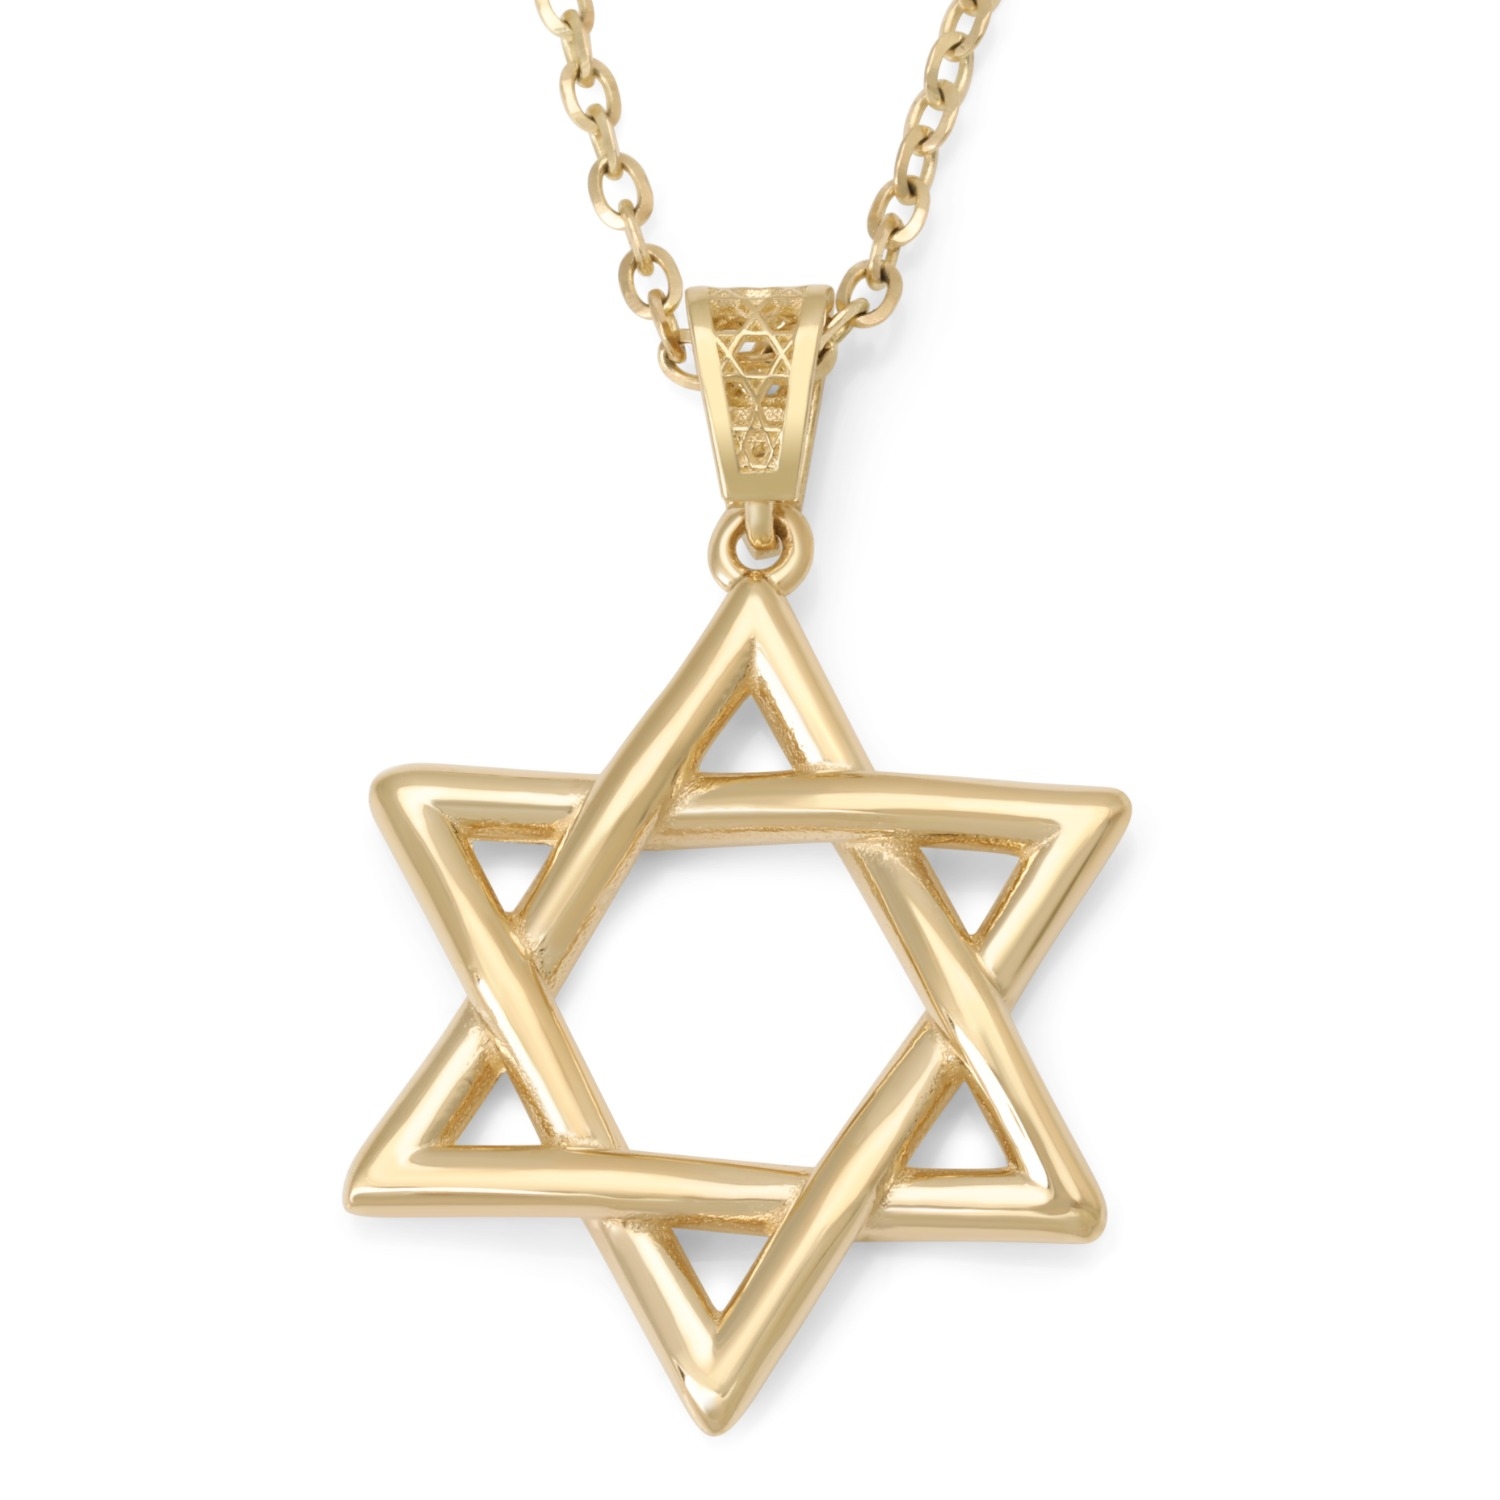 Luxurious 14K Gold Star of David Pendant Necklace - 1